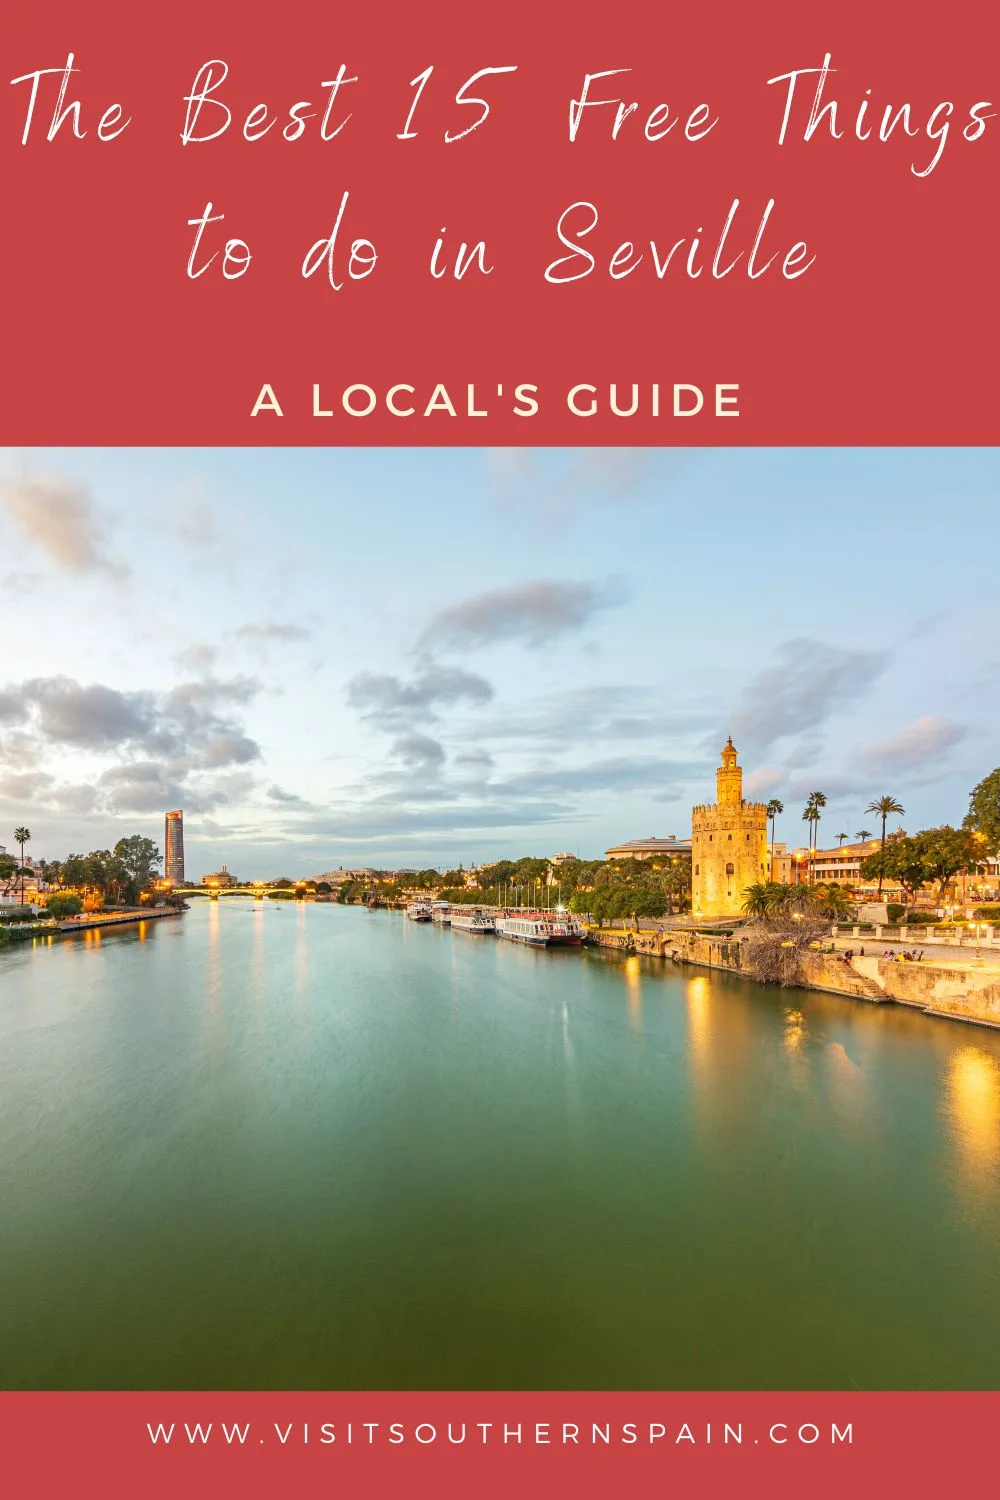 Are you looking for free things to do in Seville? We've come to the rescue with this extended travel guide to Seville and its most beautiful free attractions.  There are plenty f free things to do in Seville, from museum visits to long walks along the Guadalquivir River or through the gardens of Alcazar. Here are the 15 Free Things to do in Seville for a perfect holiday where you can enjoy this beautiful and sunny Andalucian city. #freethingsinseville #seville #freethingstodo #andalucia #spain